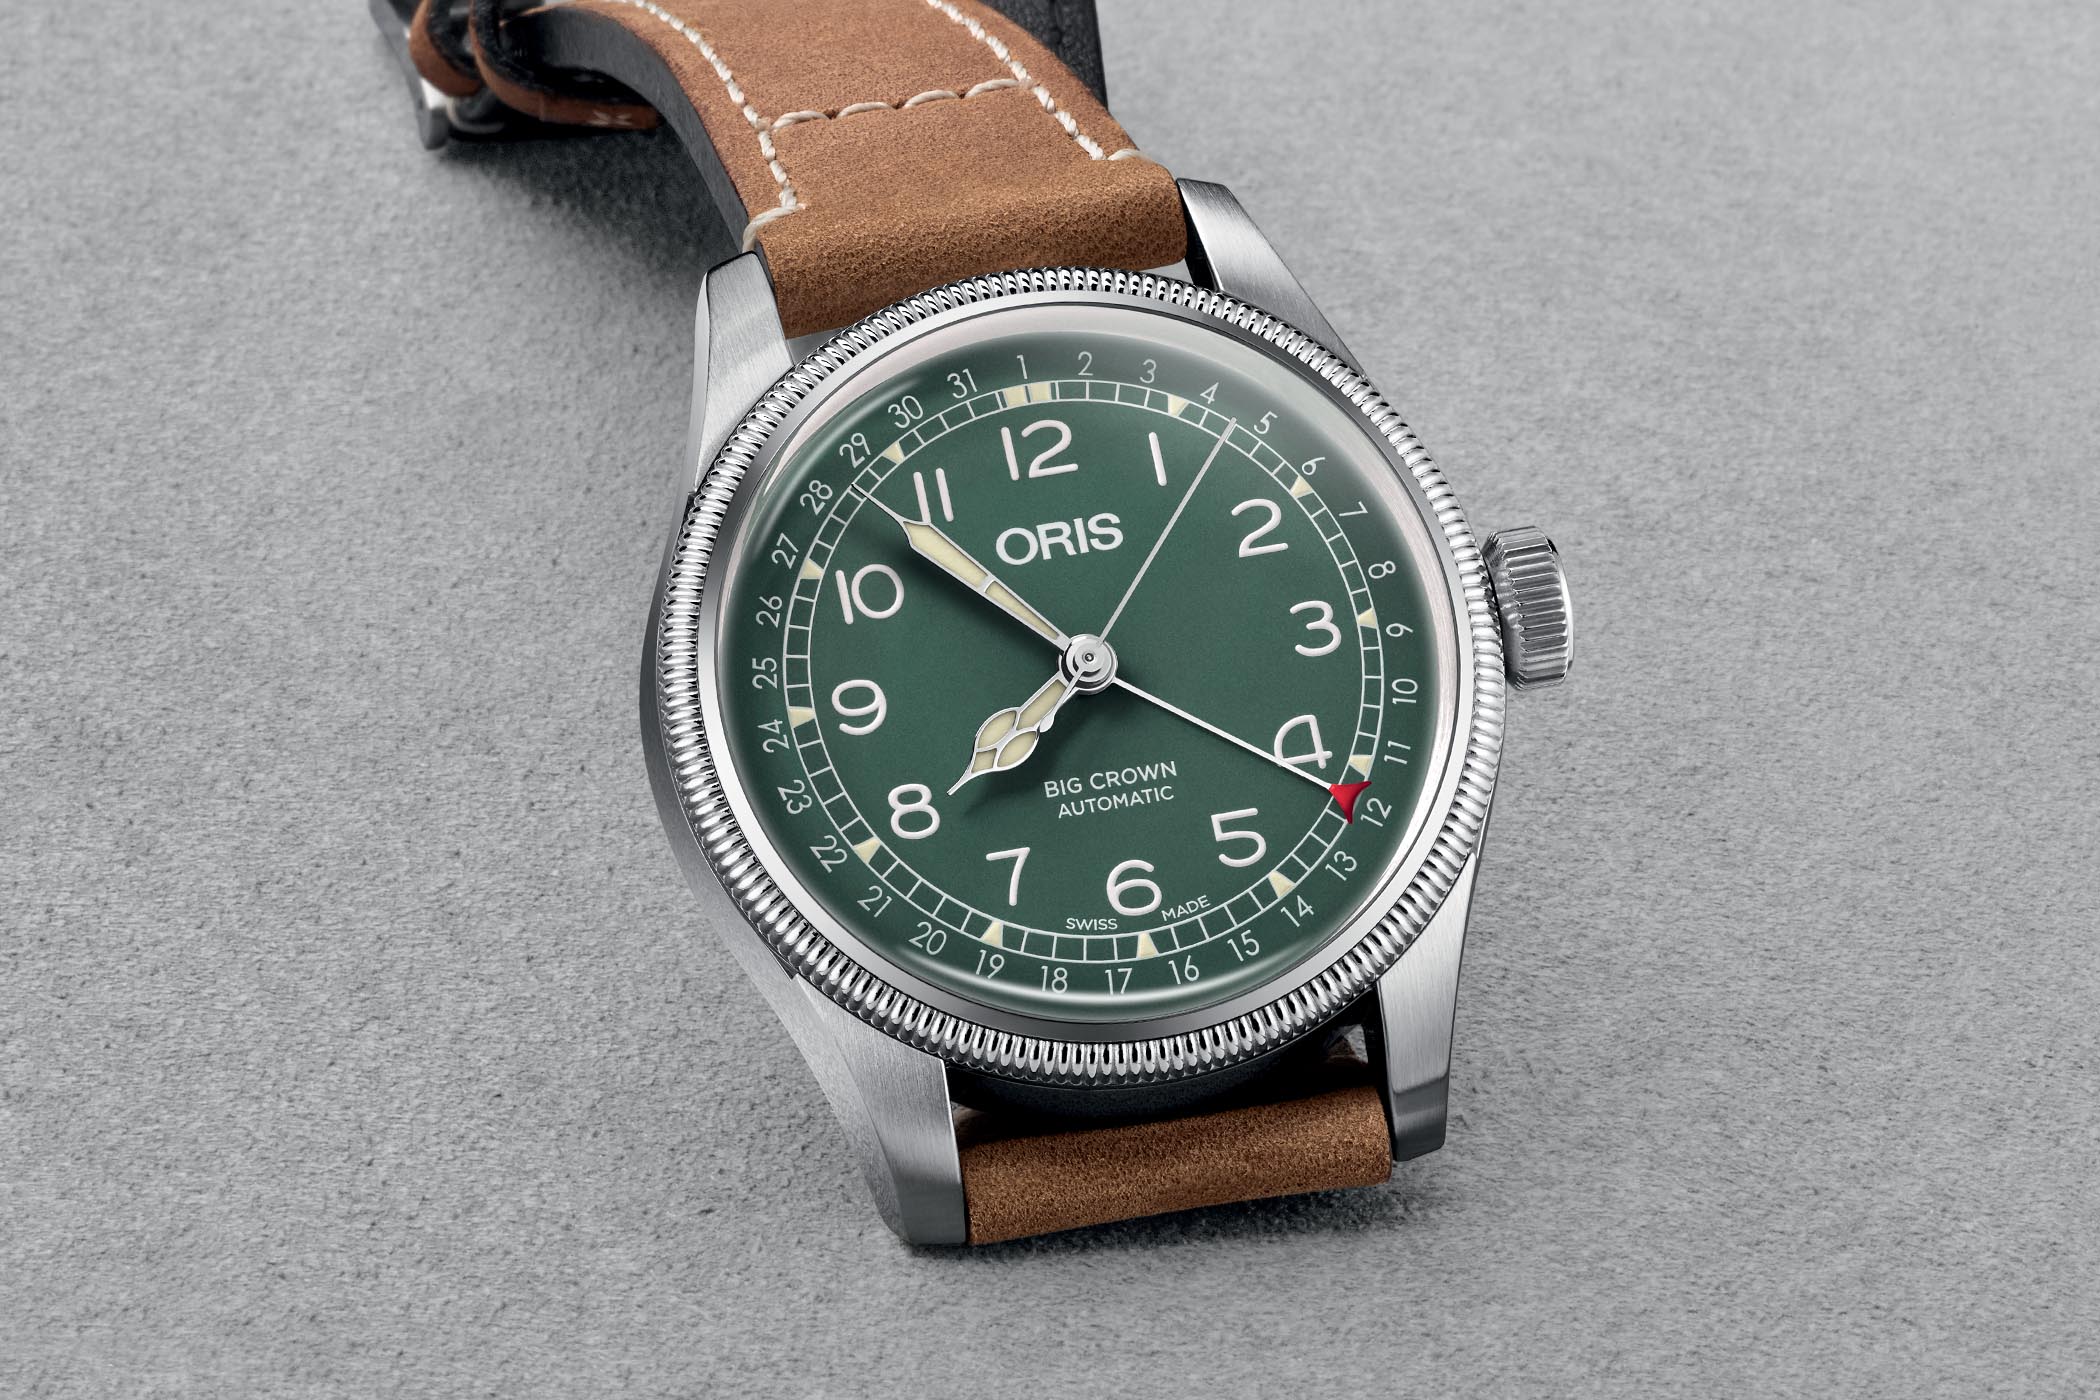 Oris Big Crown Pointer Date D.26 286 HB-RAG Limited Edition